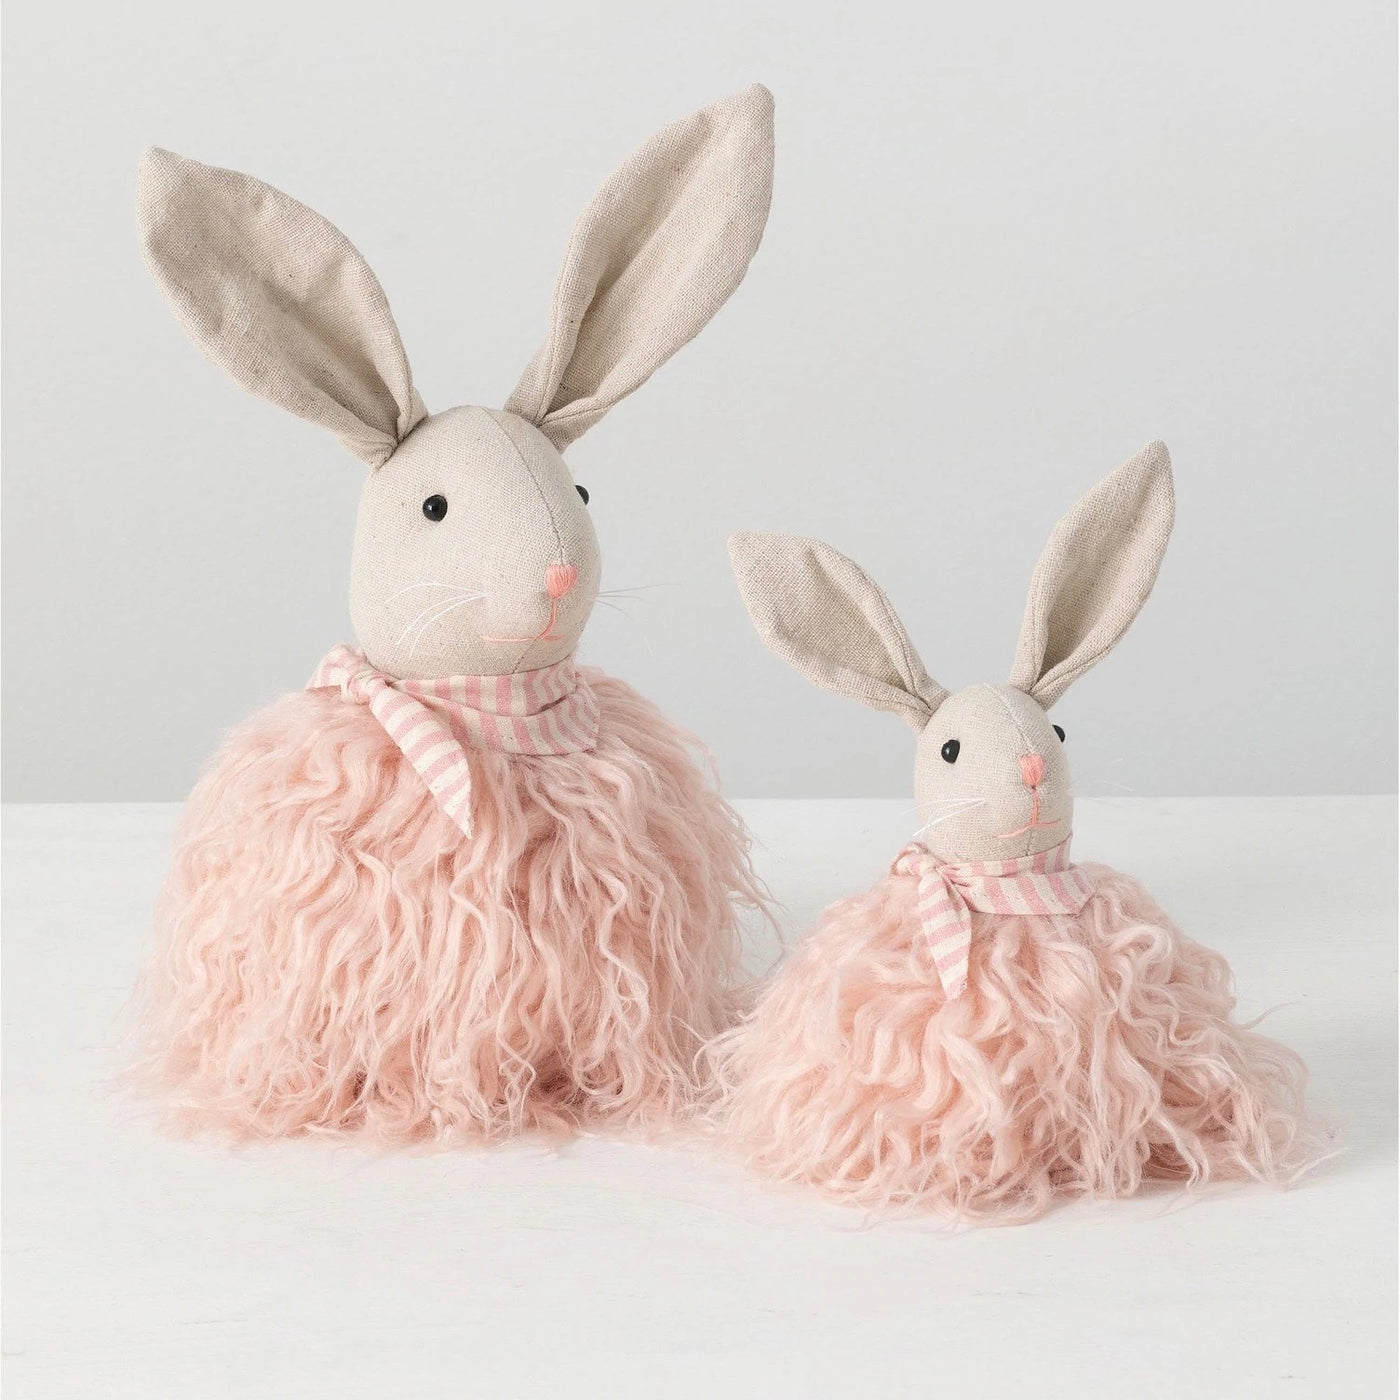 Large and small fuzzy pink bunnies